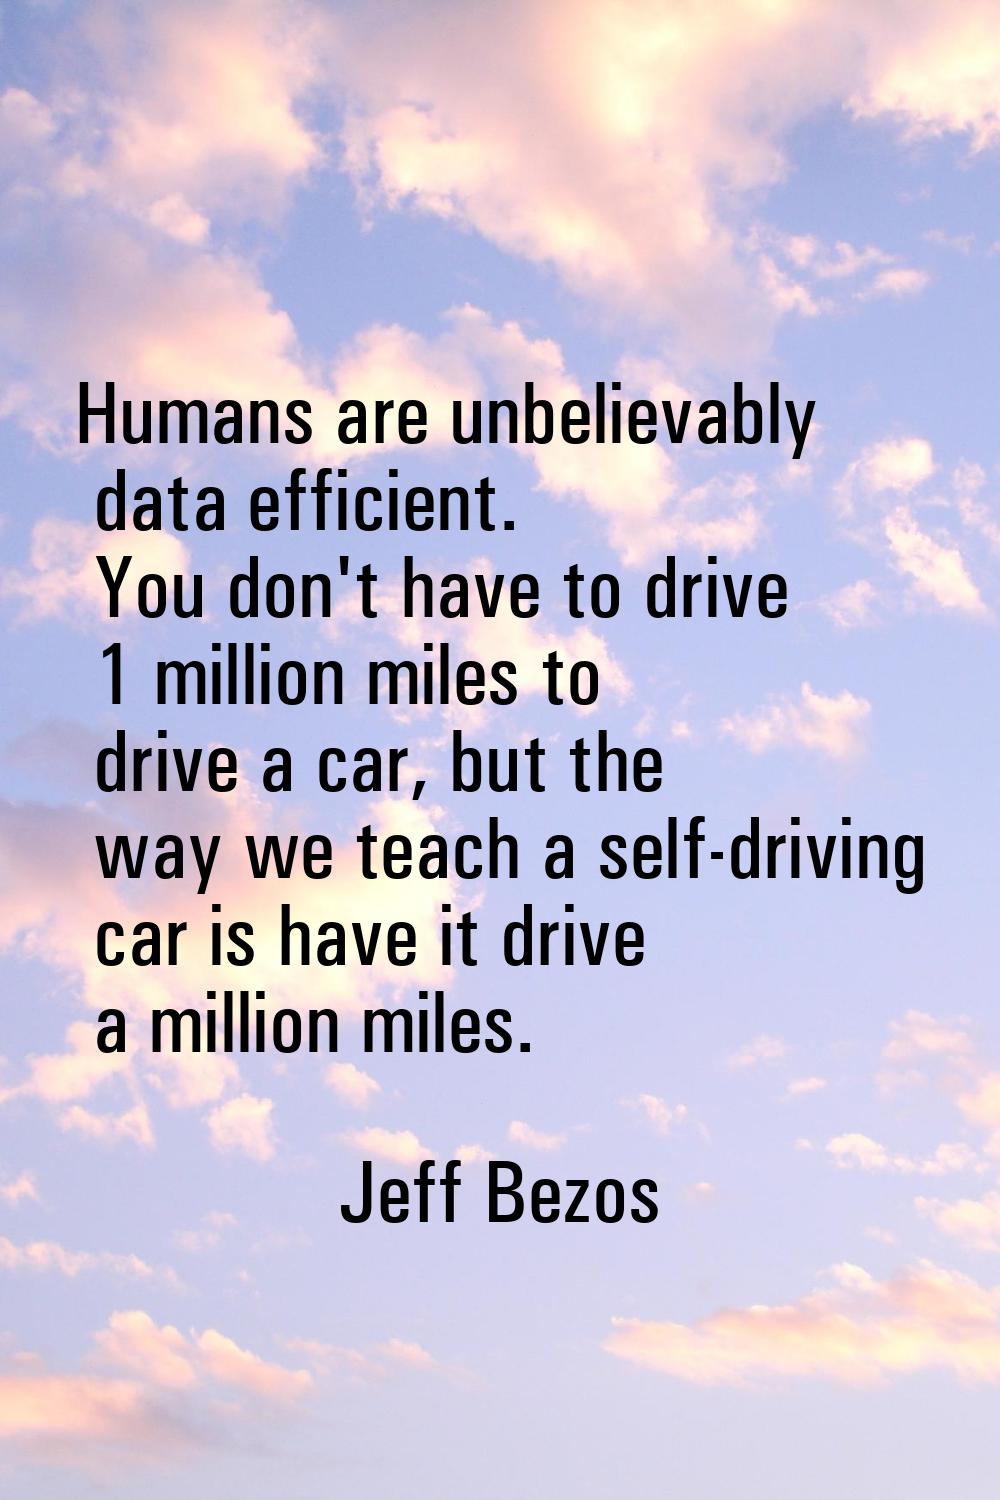 Humans are unbelievably data efficient. You don't have to drive 1 million miles to drive a car, but